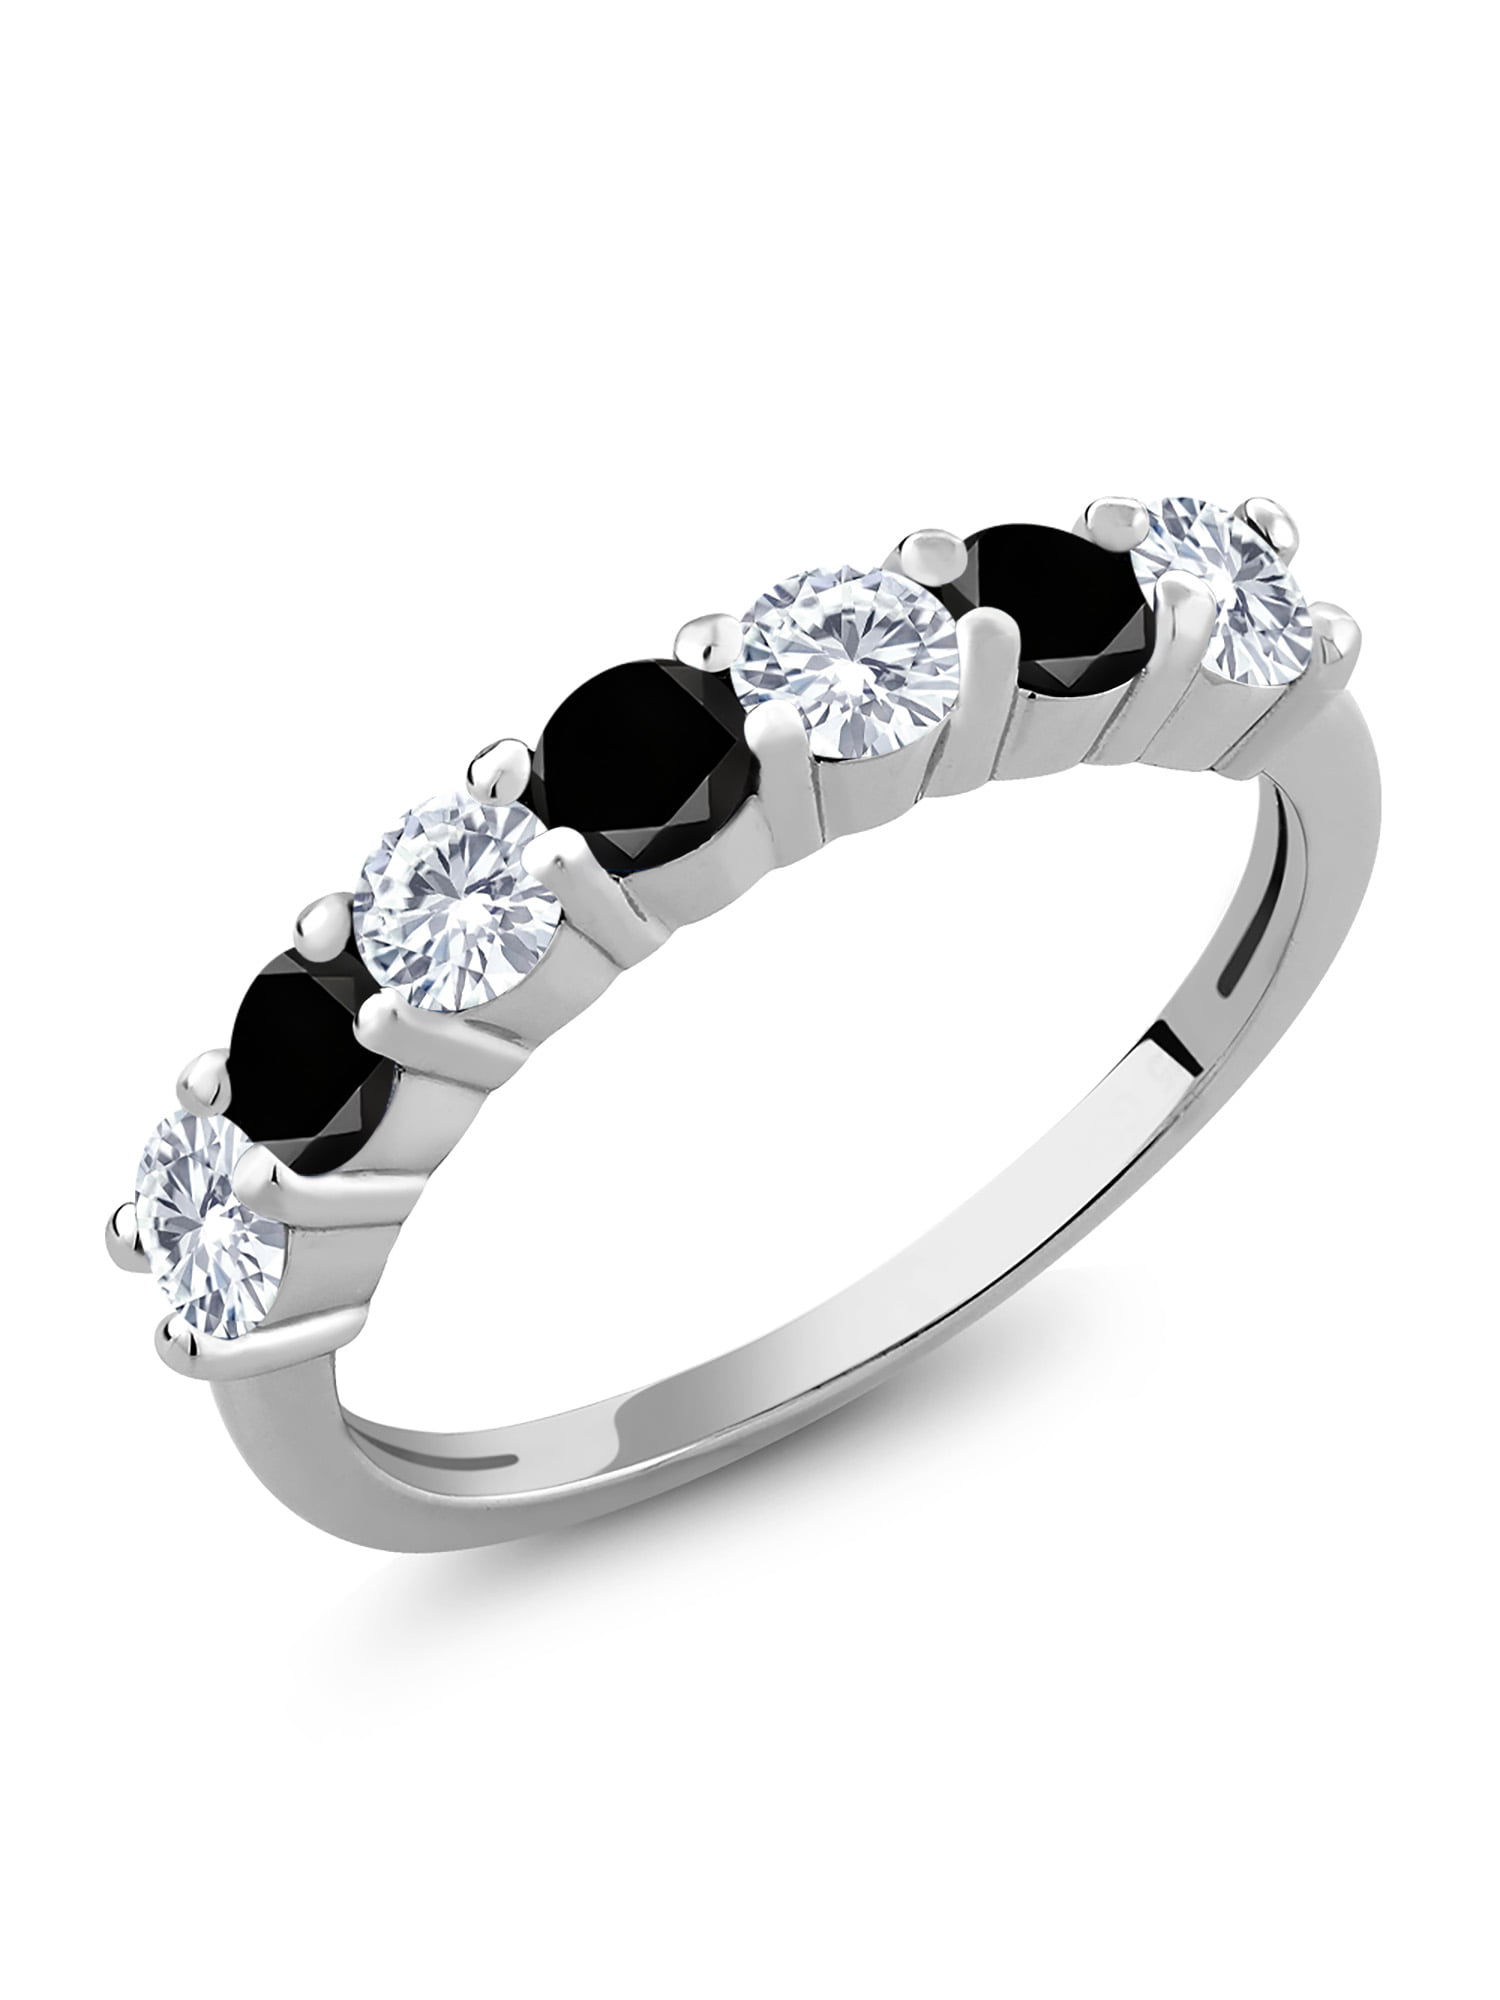 3.59 ct BLACK COLOR REAL MOISSANITE PRINCESS .925 SILVER RING SIZE 7 